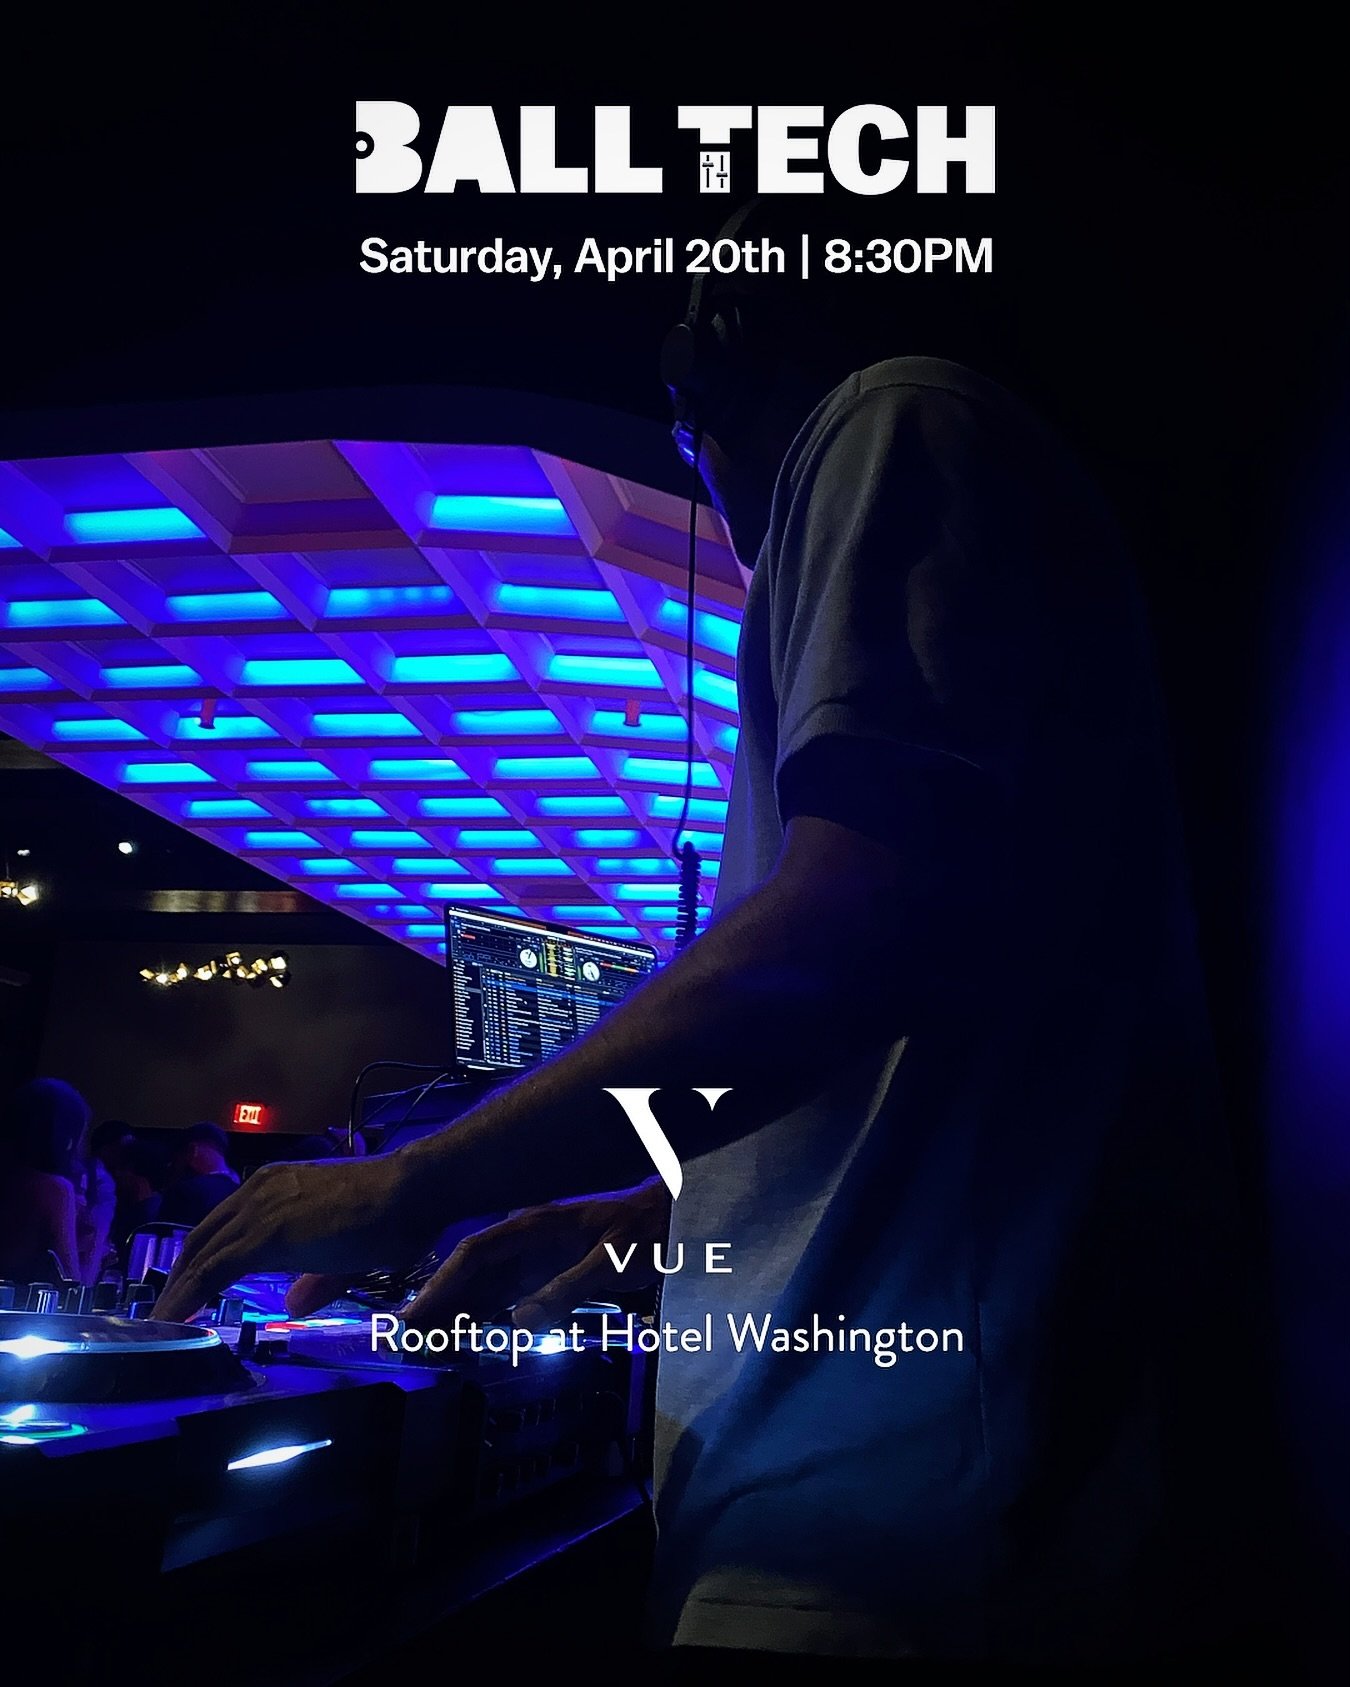 Rooftop vibes this Saturday @vuerooftopdc 
.
.
.
.
.
.
.
#balltech #rooftopbar #rooftopparty #dj #djlife #dcevents #dc #dmv #420 #thingstodoindc #saturdaynightdc #music #drinks